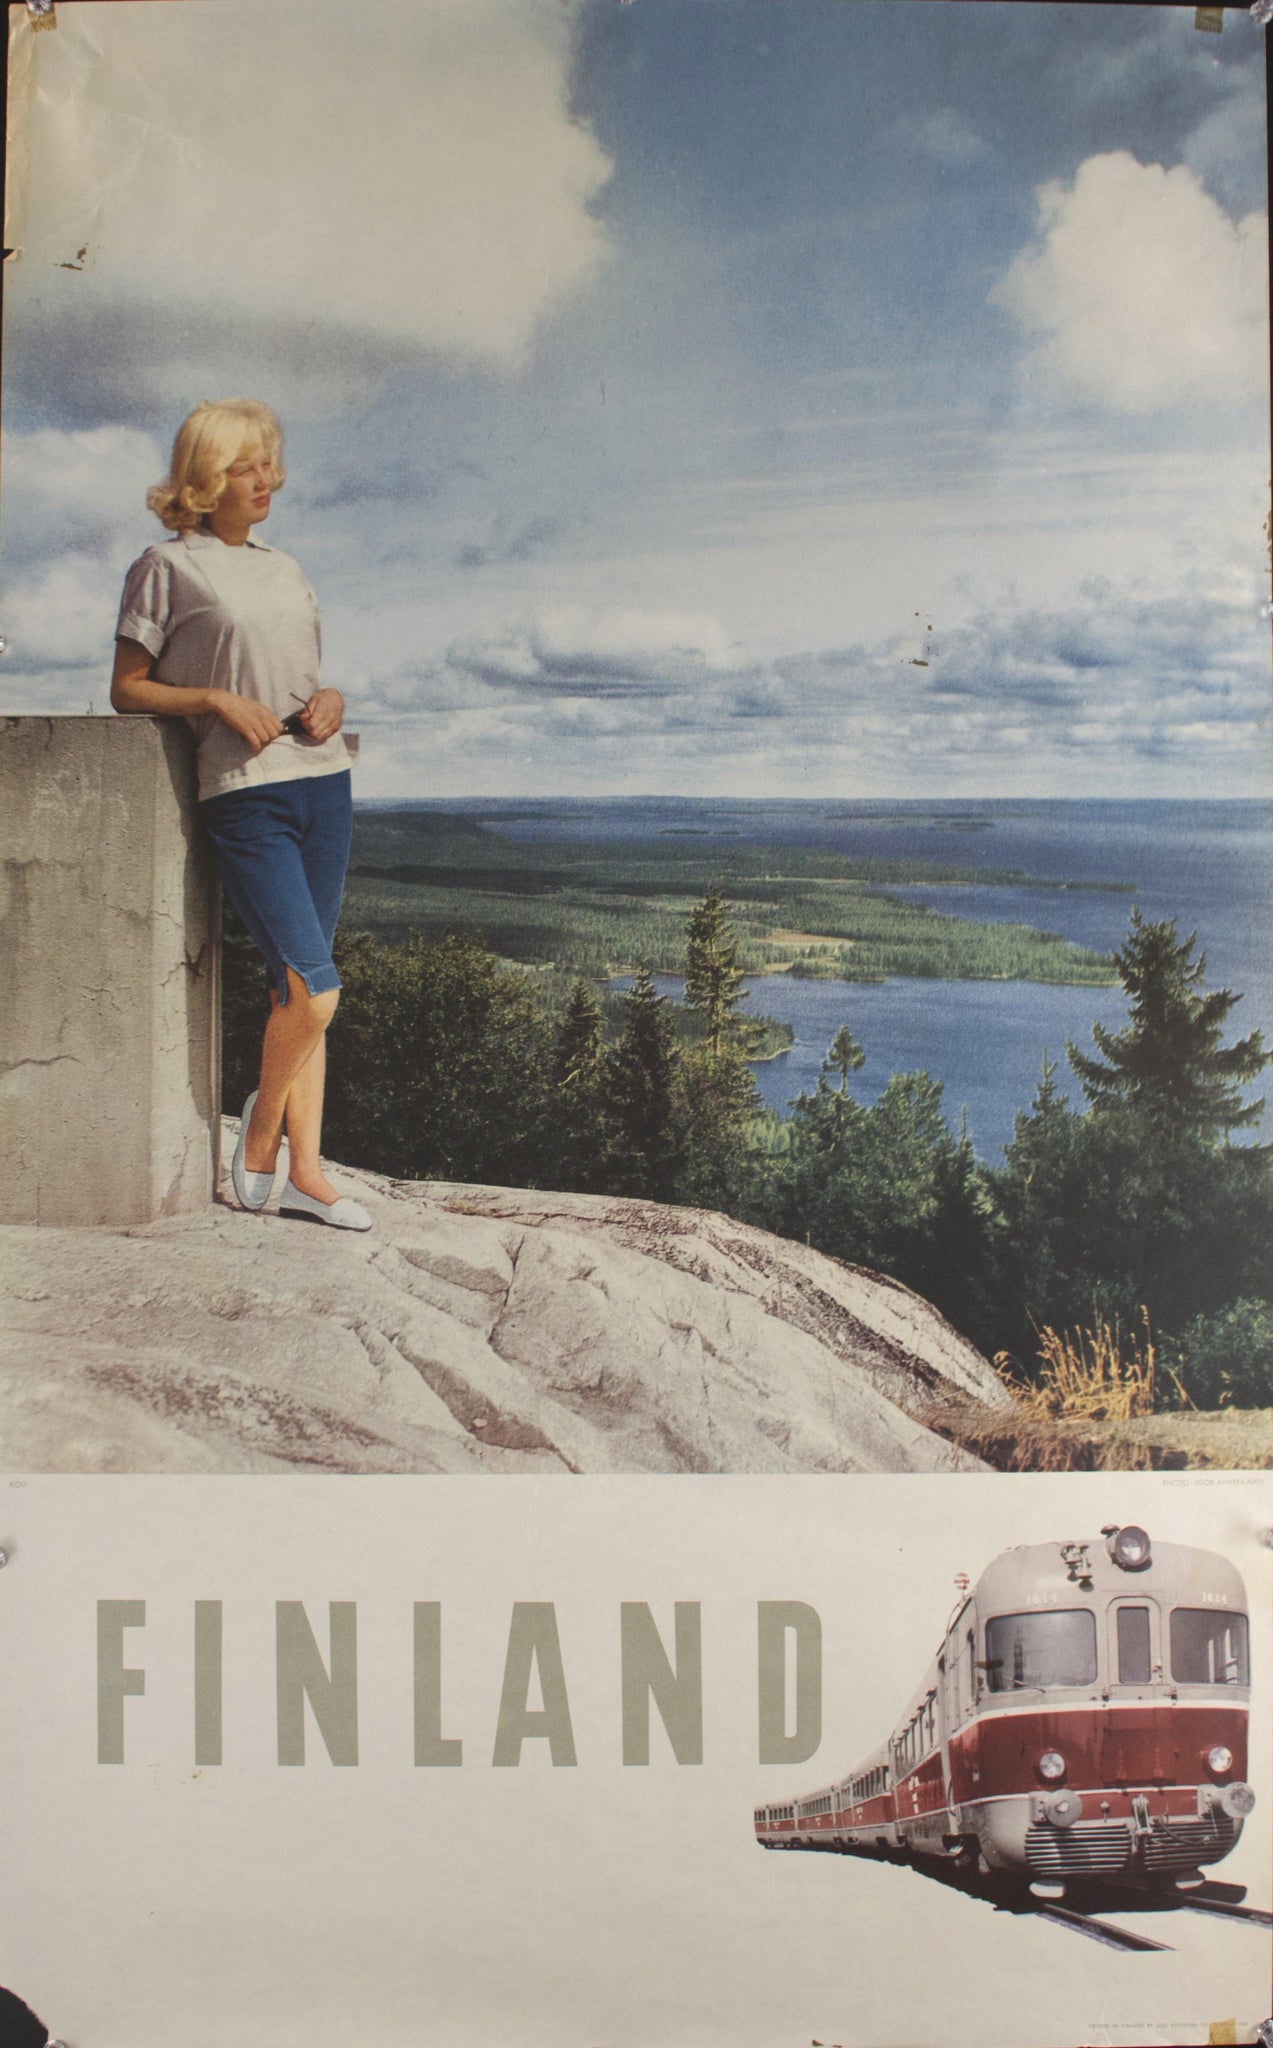 1960 Finland - Golden Age Posters